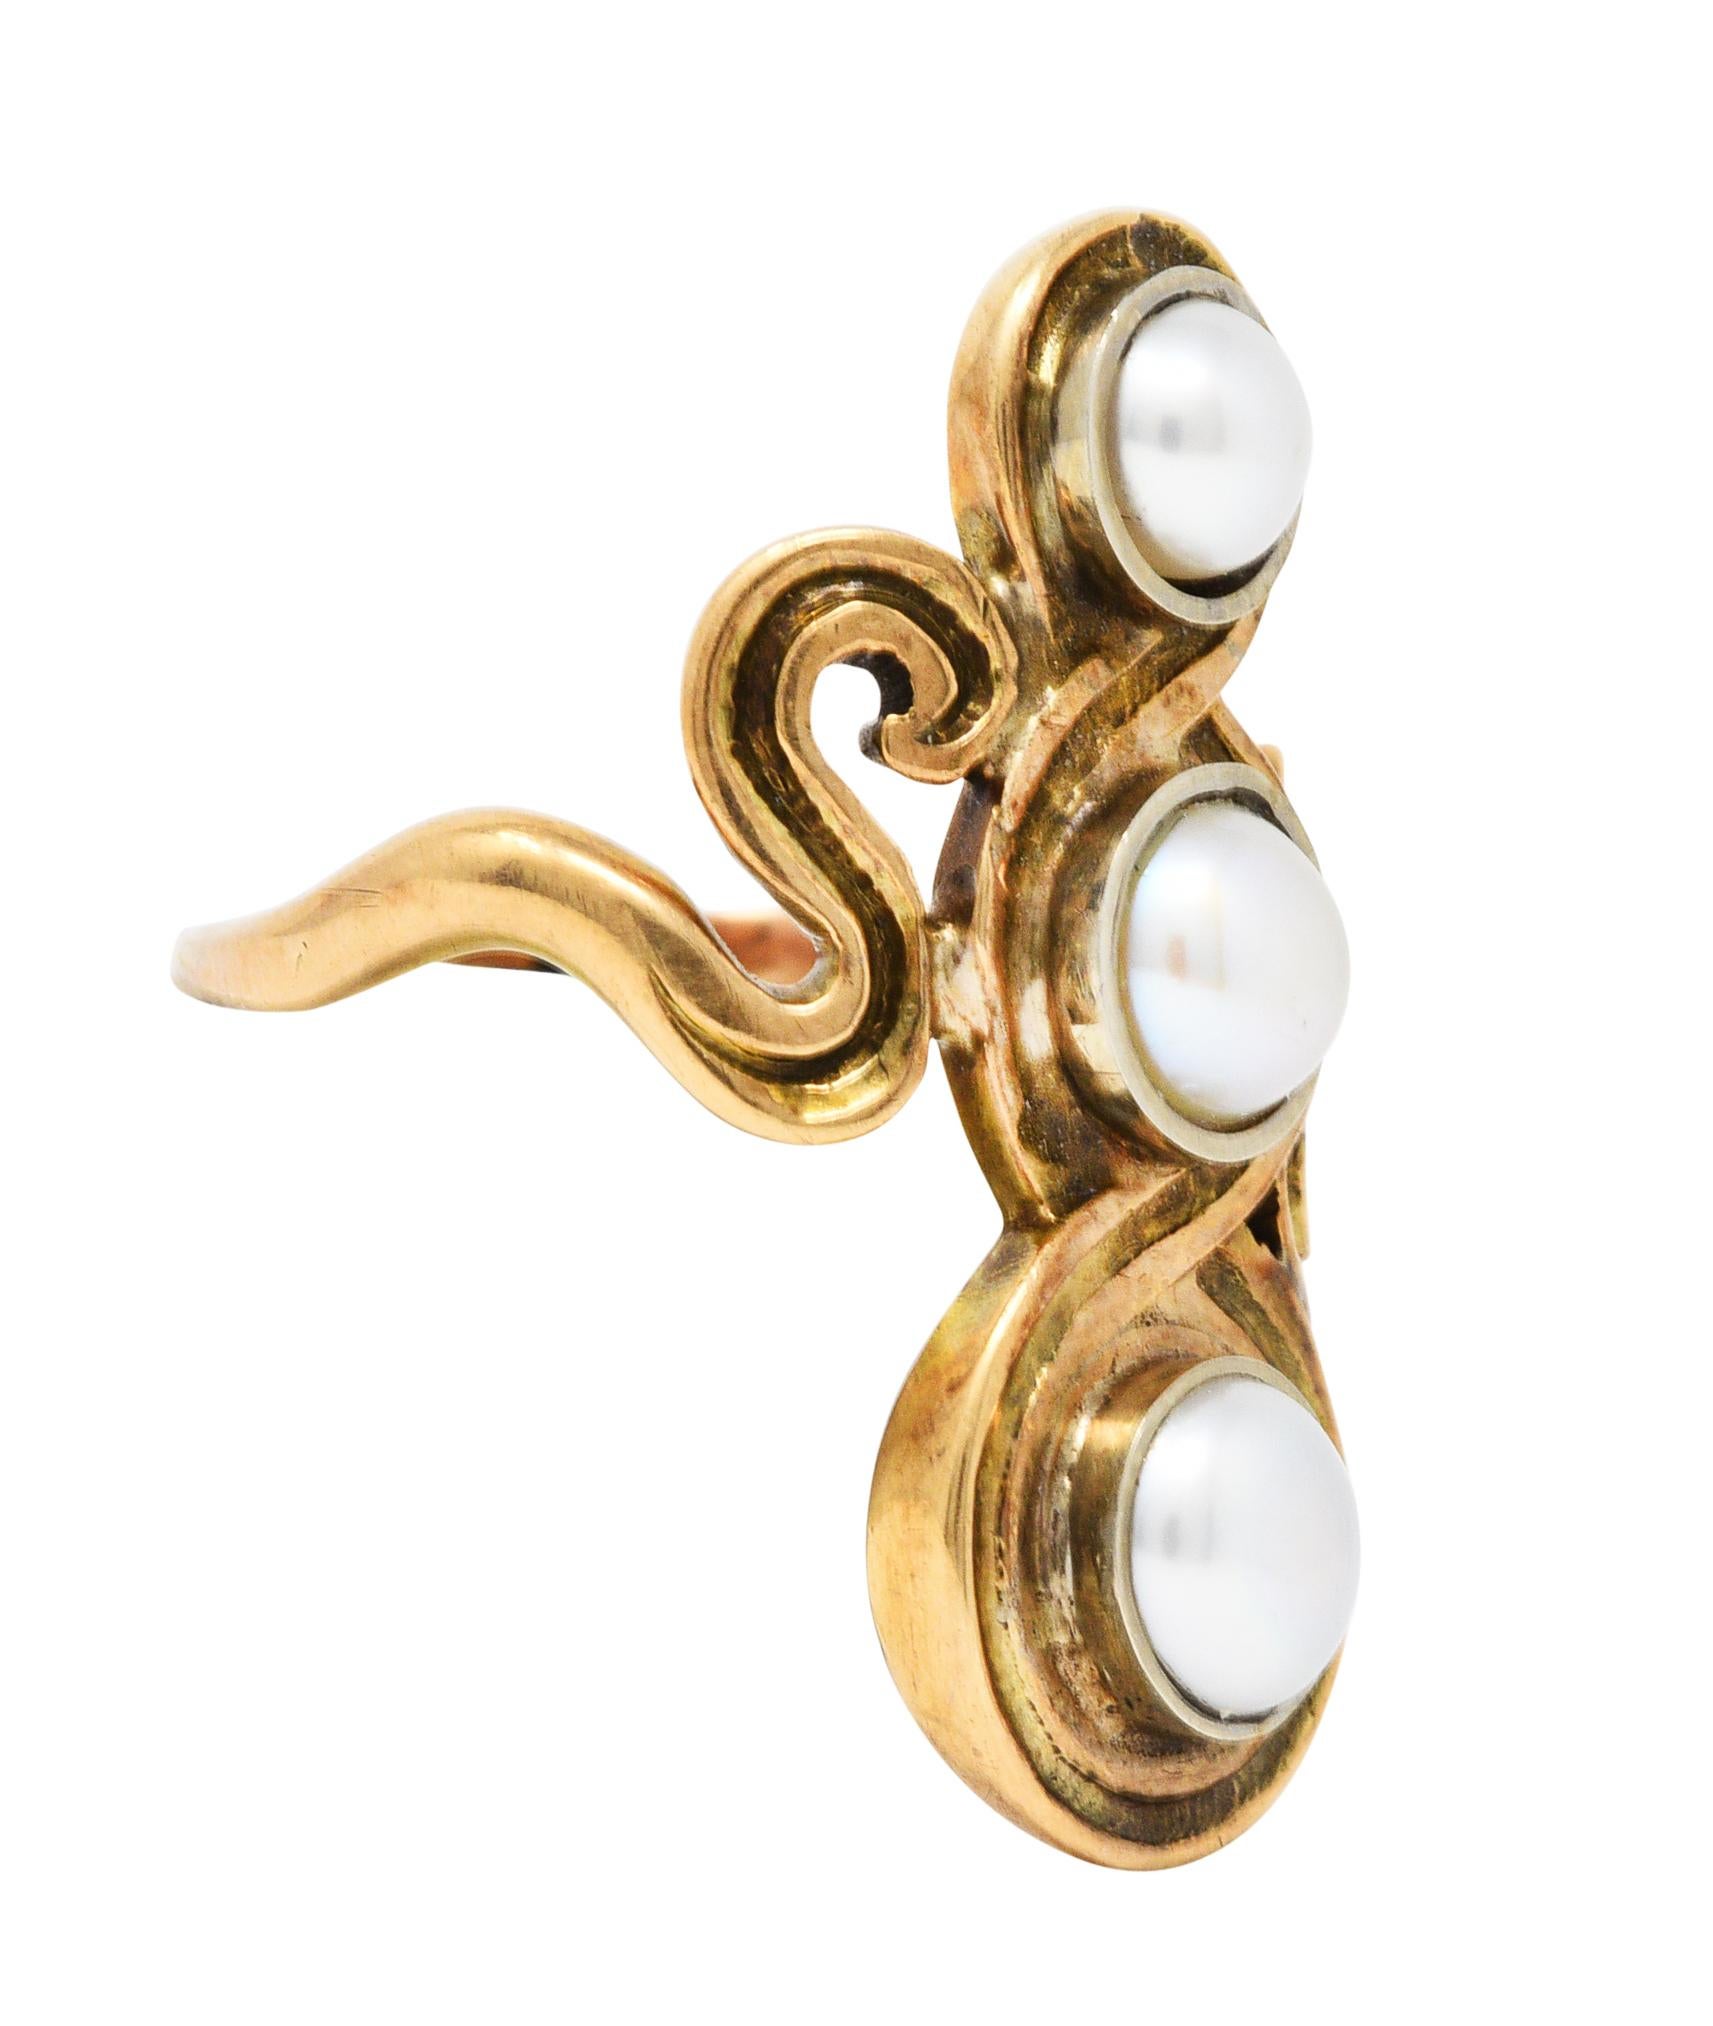 Full finger ring centers three button pearls - very well matched

Measuring from 4.5 mm to 5.5 mm with white to cream color and strong iridescence

Each is bezel set then surrounded by a scrolling figure eight design

Stamped 14K for 14 karat